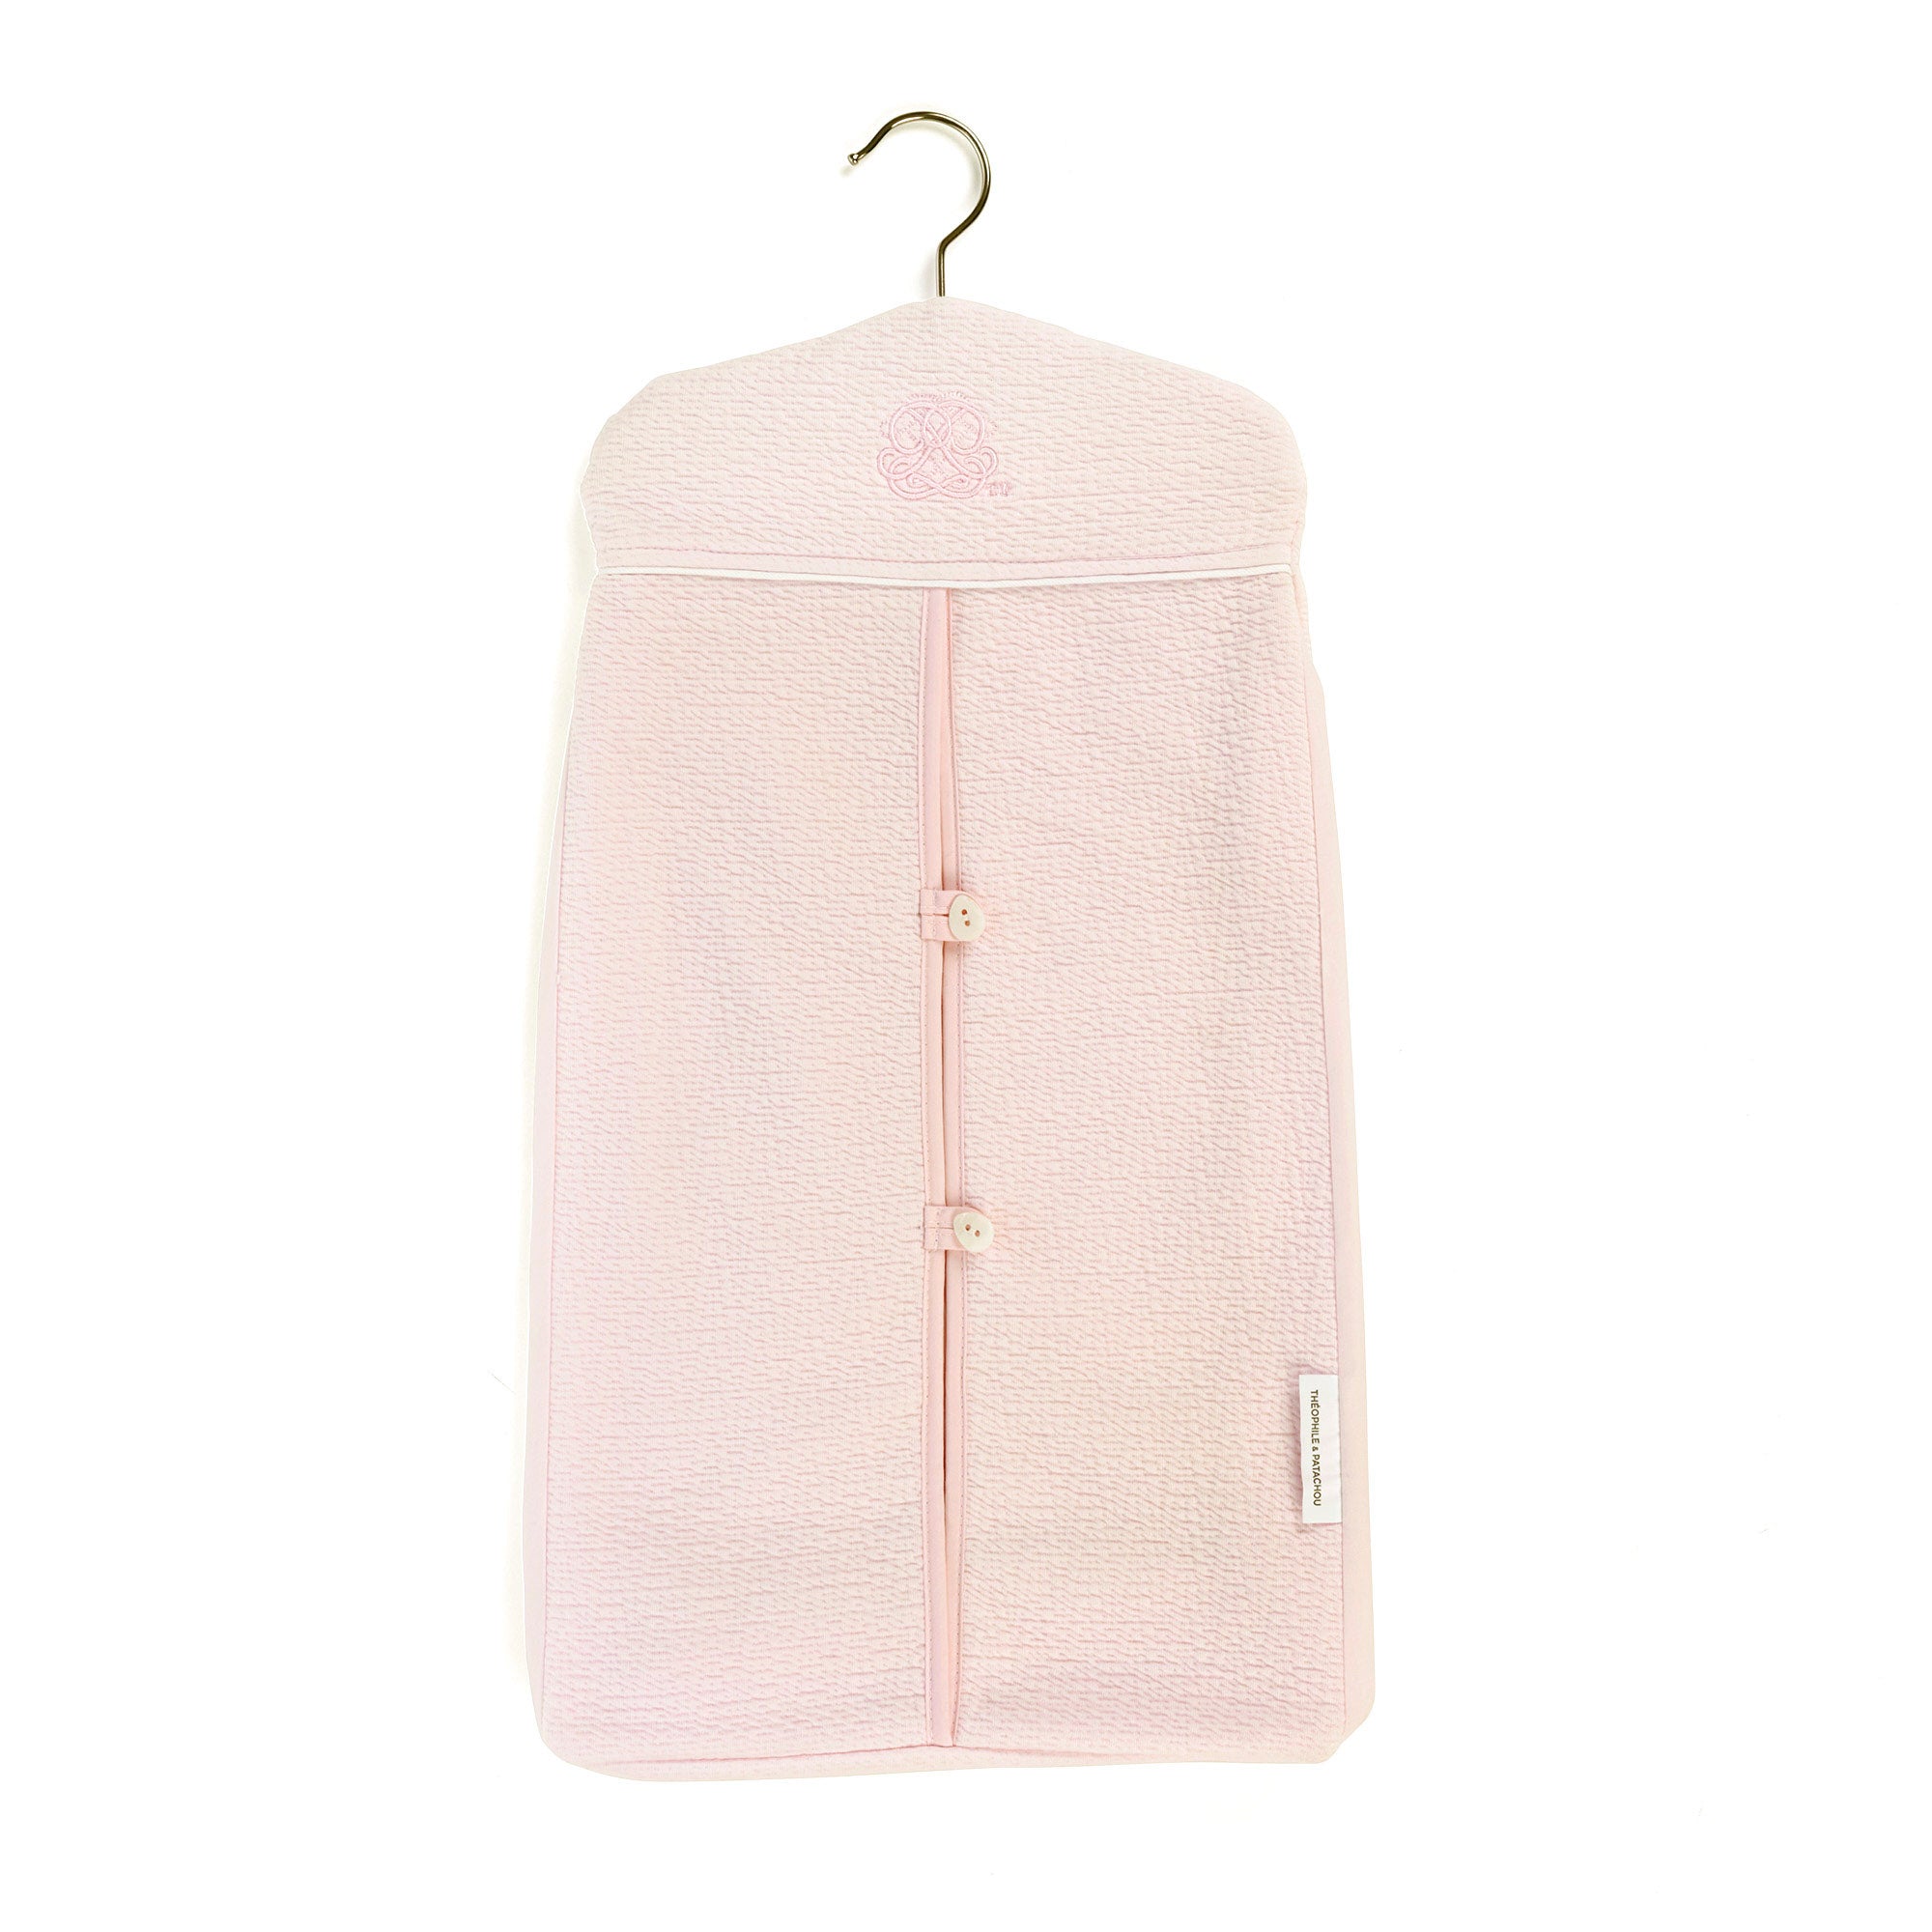 Theophile & Patachou Nappy Stacker - Cotton Pink